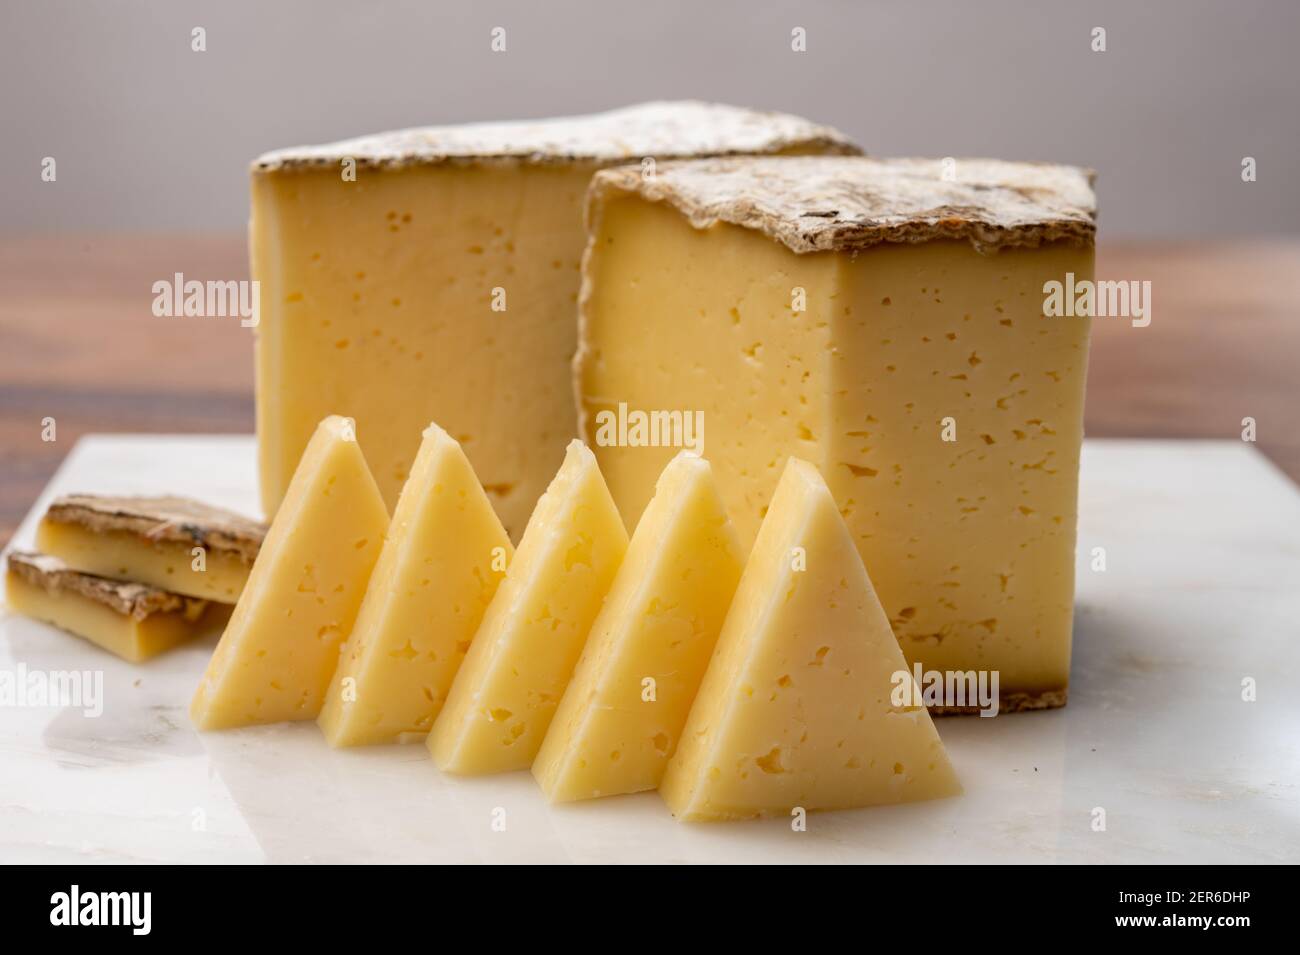 Cheese Tomme de Savoie cheese from Savoy region in French Alps, mild cow's milk cheese with beige interior and thick brownish-grey rind c Photo - Alamy